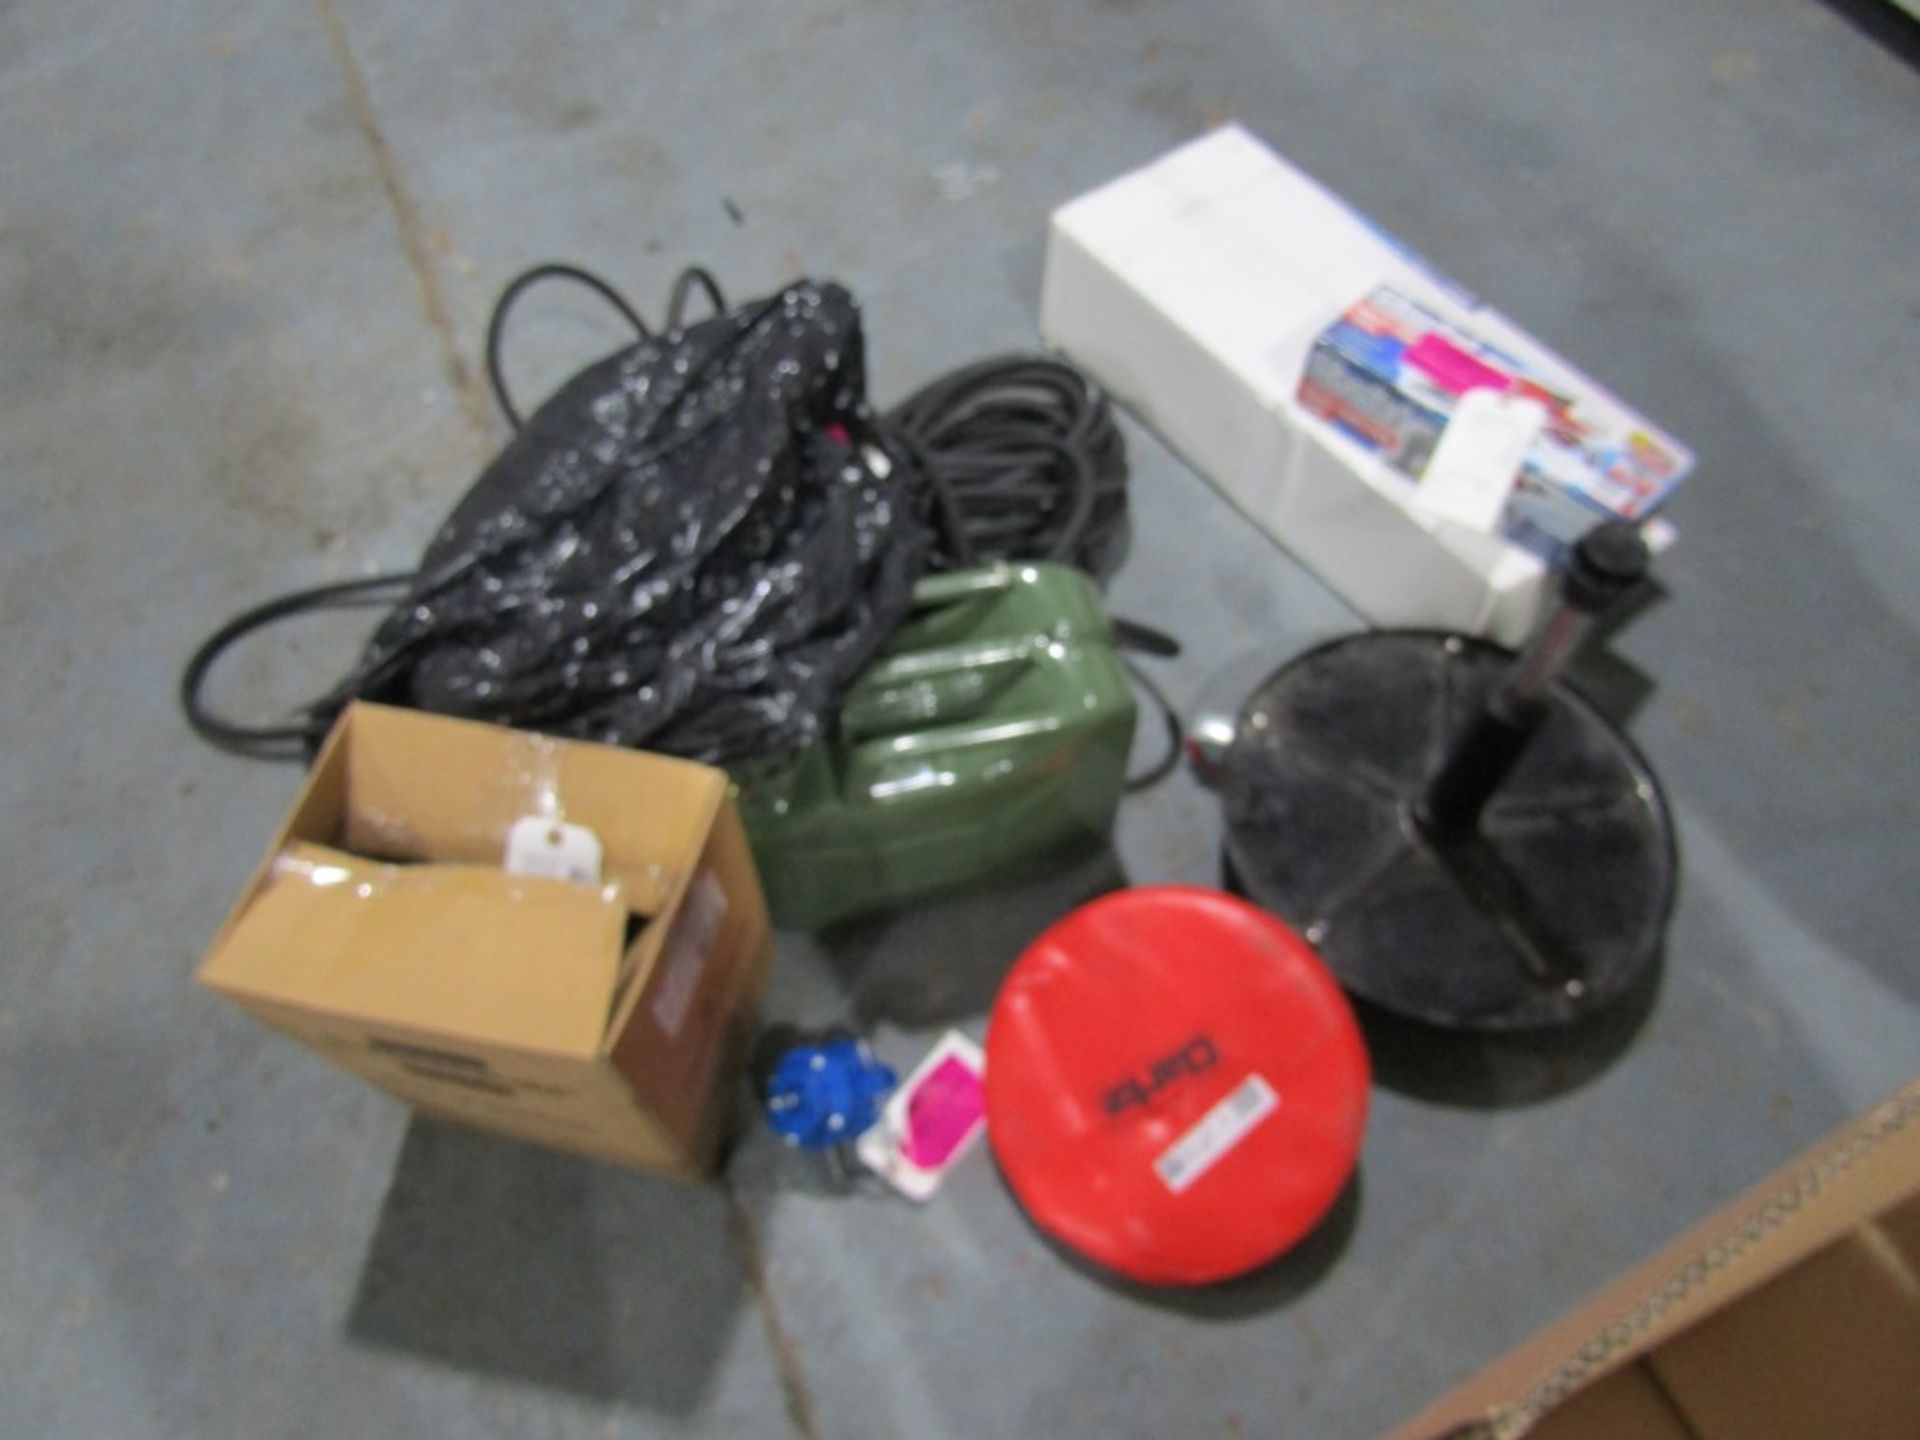 AIR HOSE, MOBILE SEAT, VICE, PUMP, CUTTING TOOL SET, MULTI FUNCTION TOOL, JERRY CAN [+ VAT]